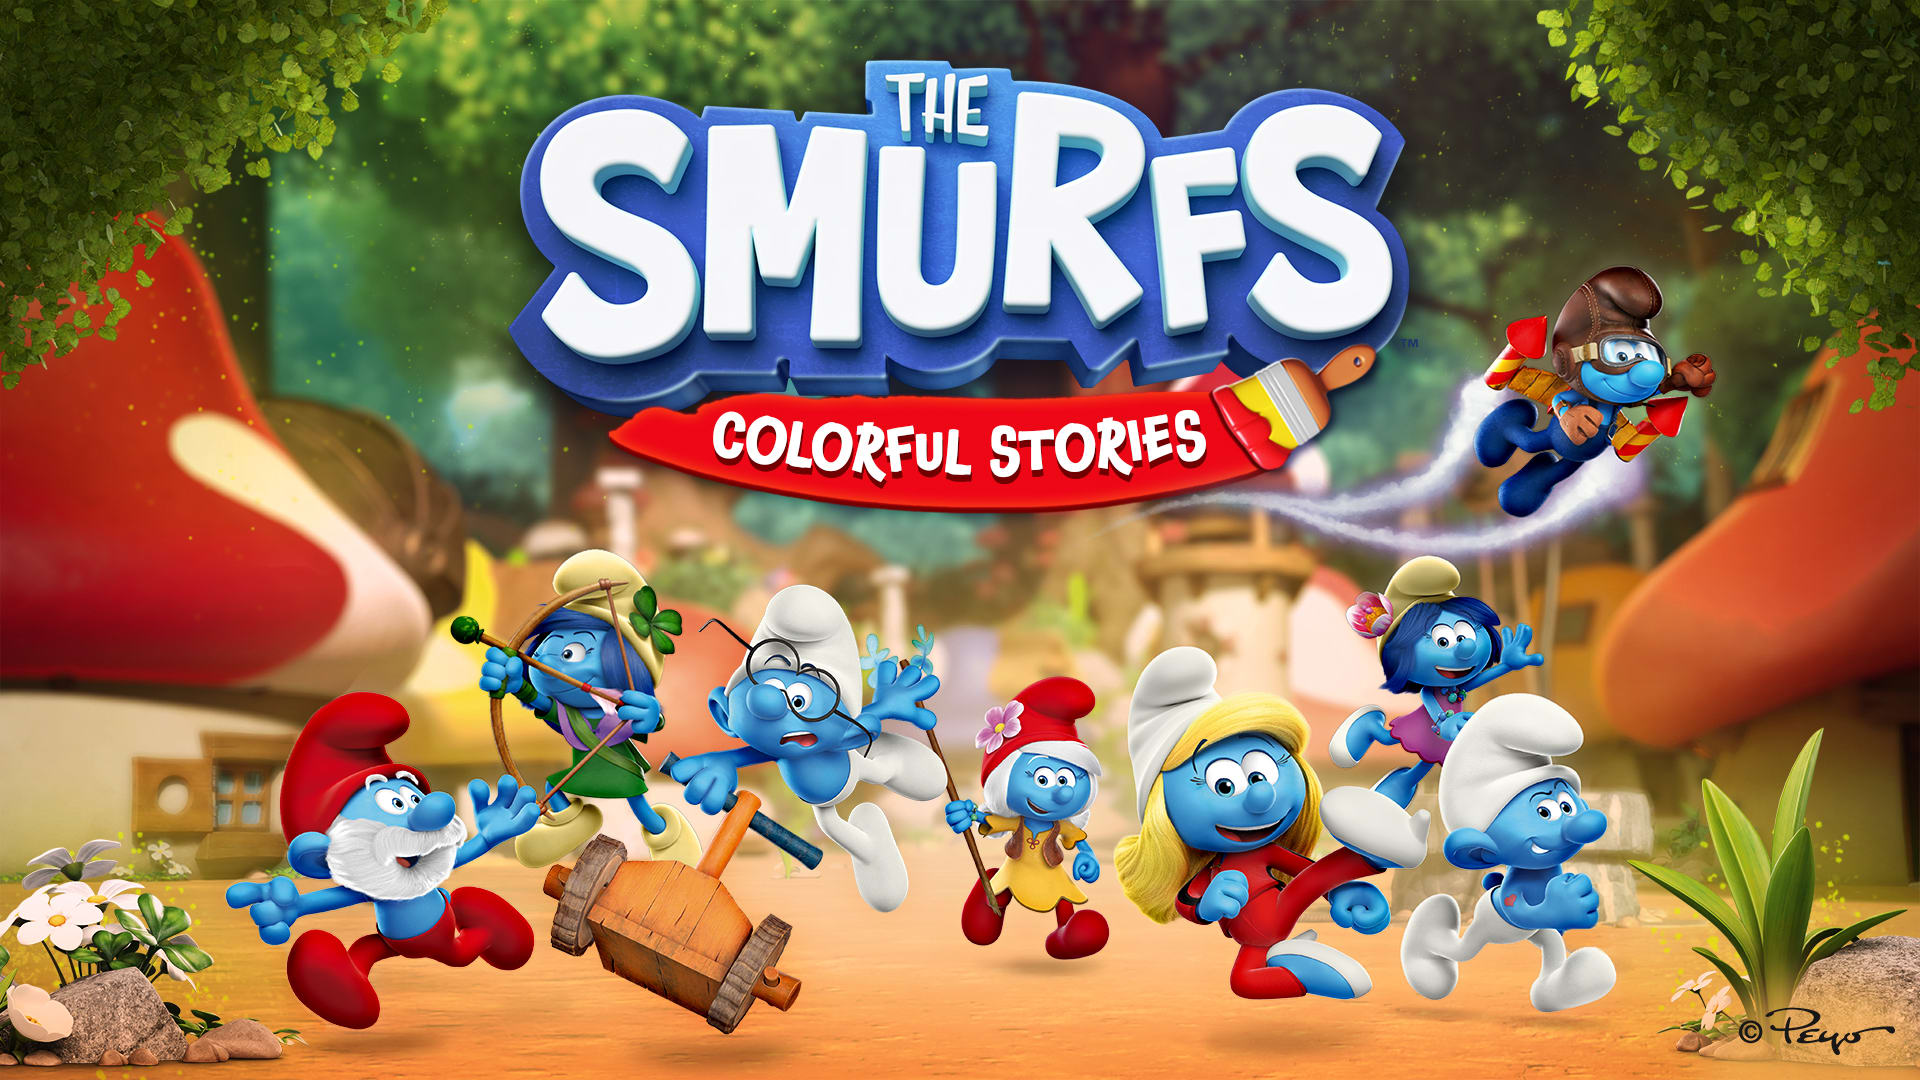 The Smurfs: Colorful Stories